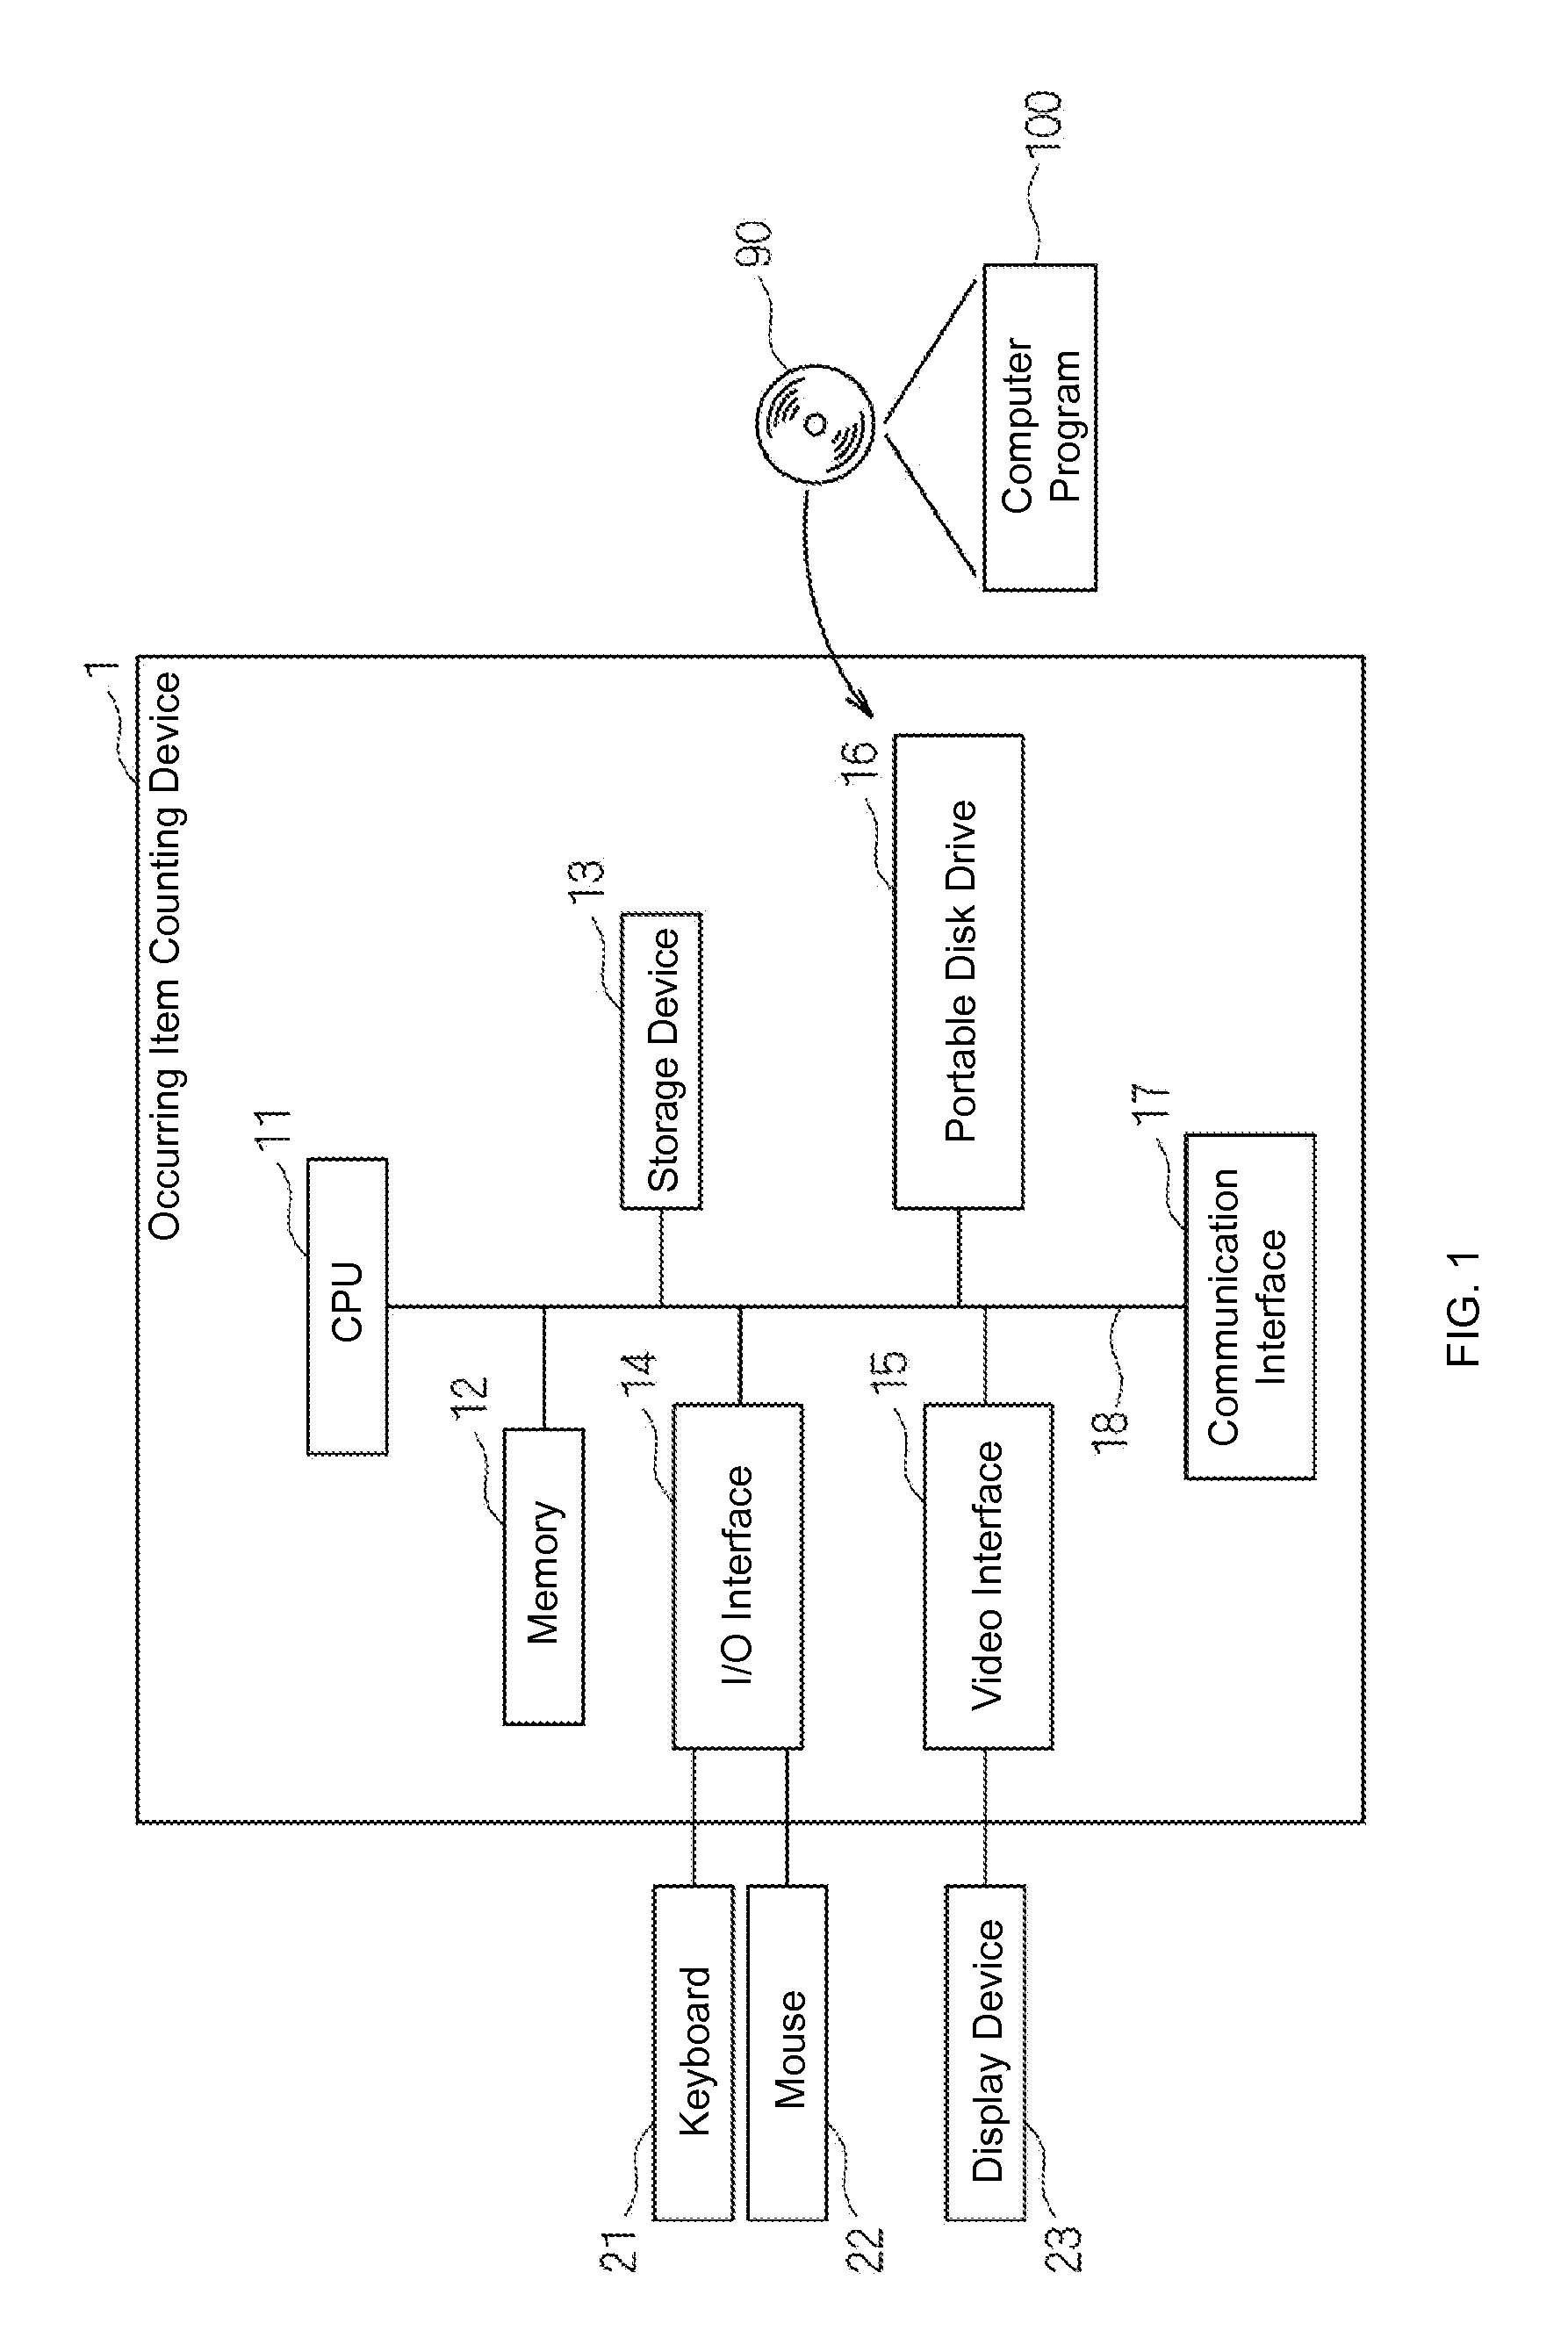 Method, Device and Computer Program for Identifying Items Having High Frequency of Occurrence Among Items Included in a Text Data Stream